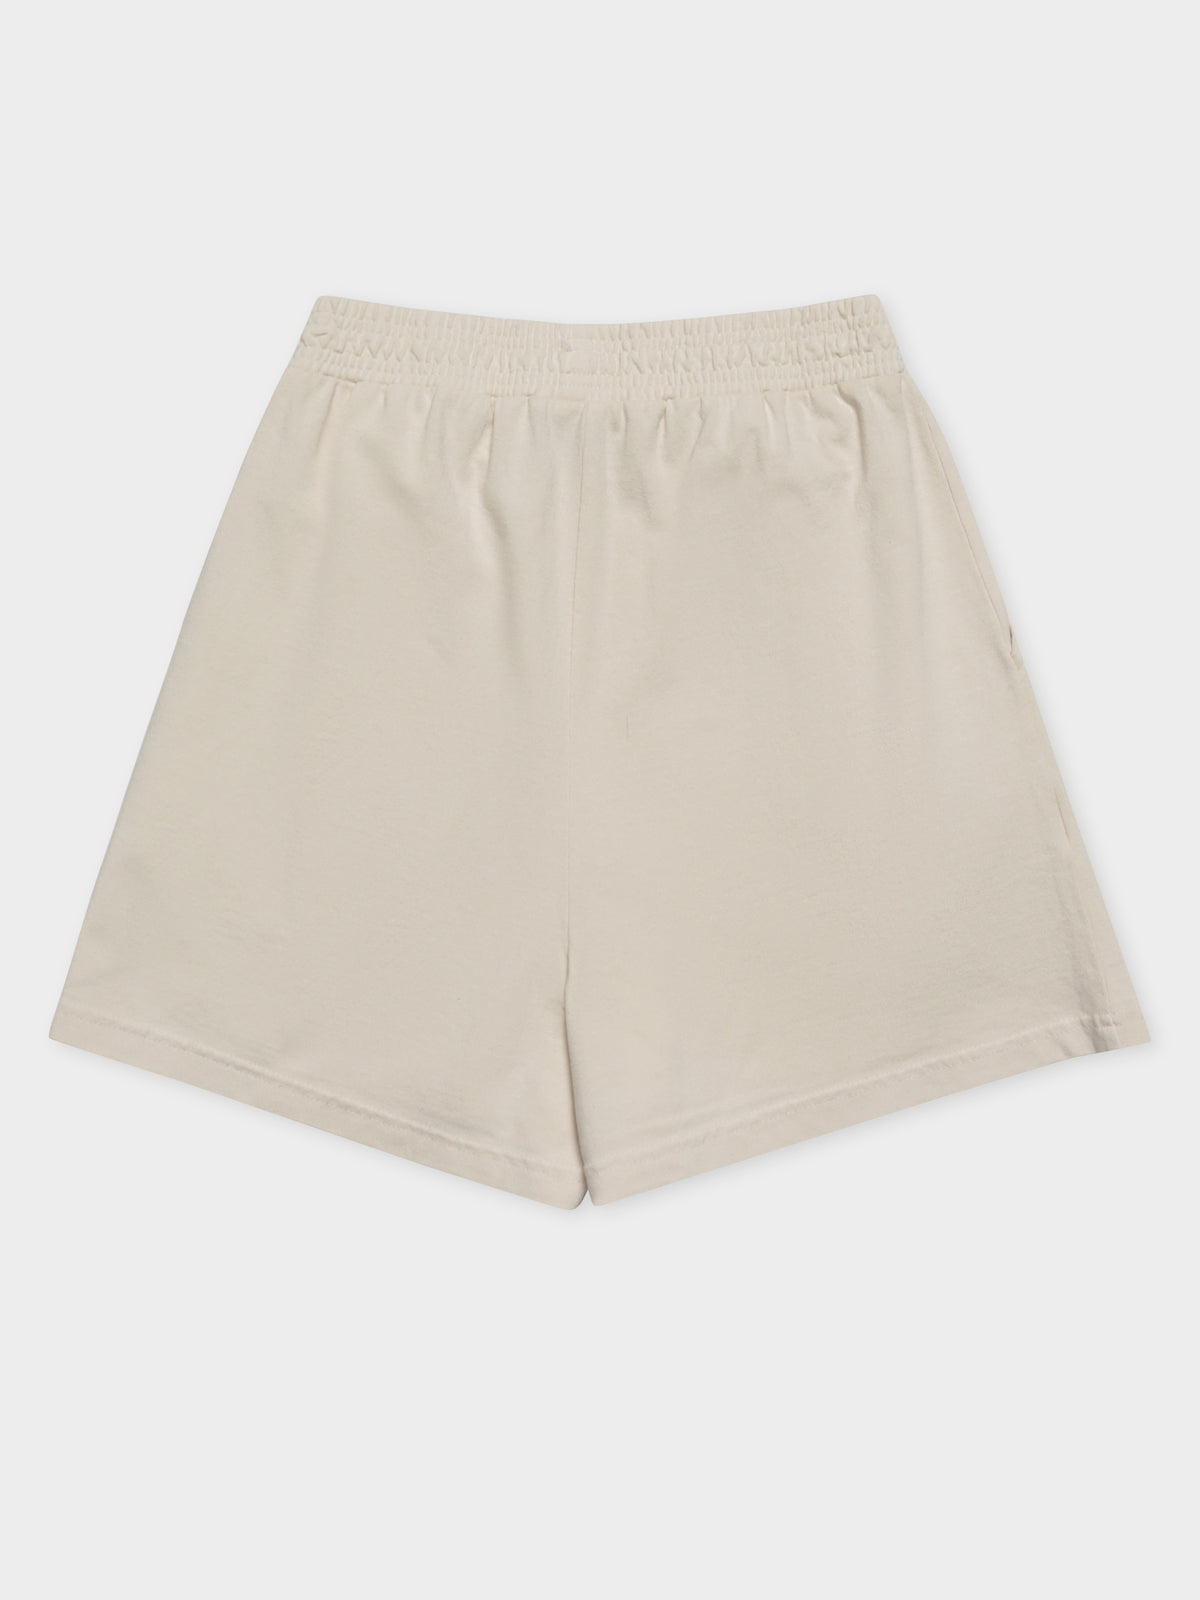 Trail Rugby Shorts in White Sand